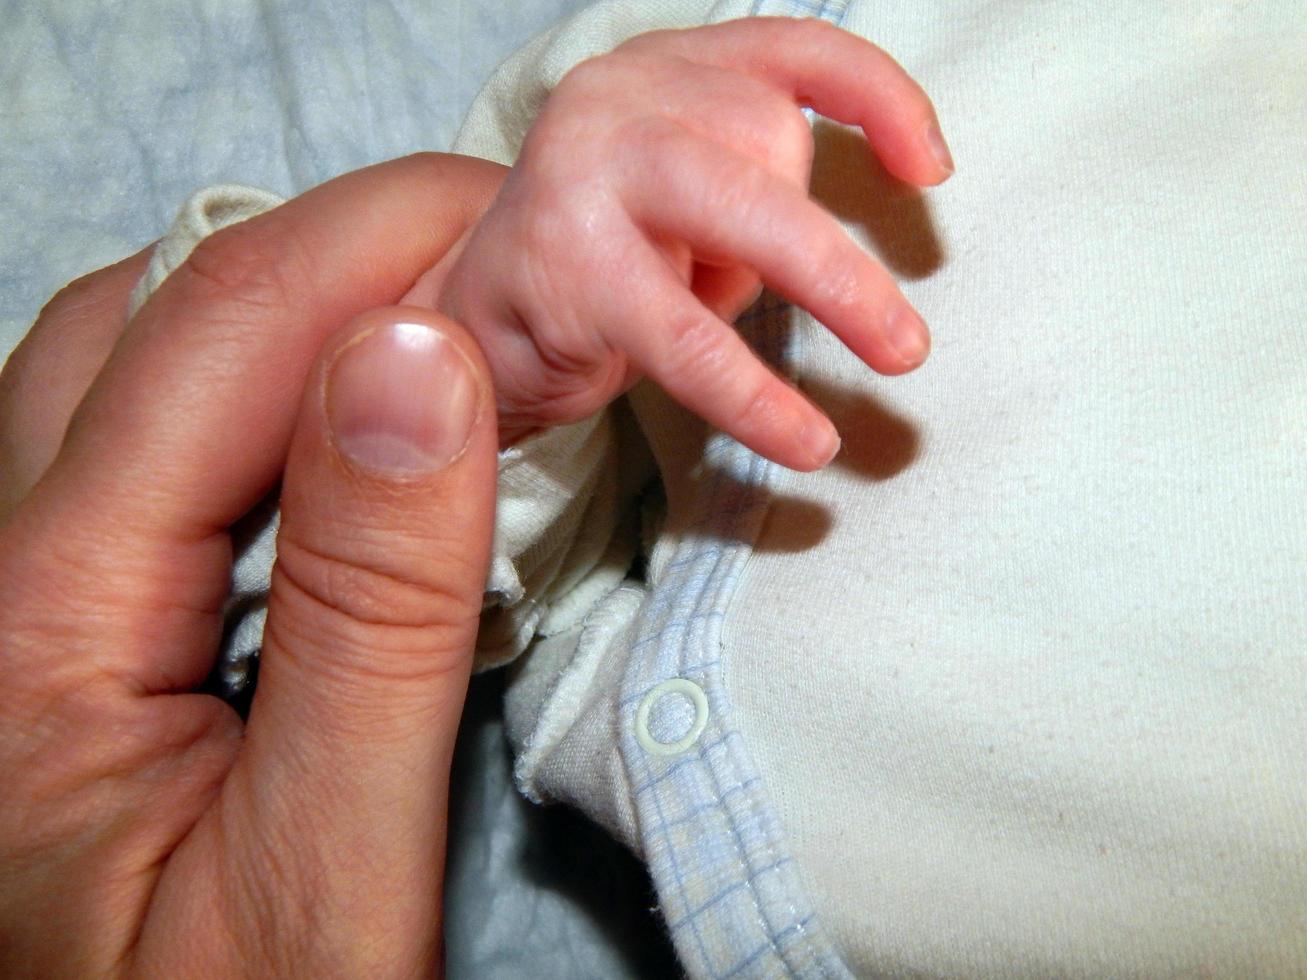 The hand of a child and an adult photo